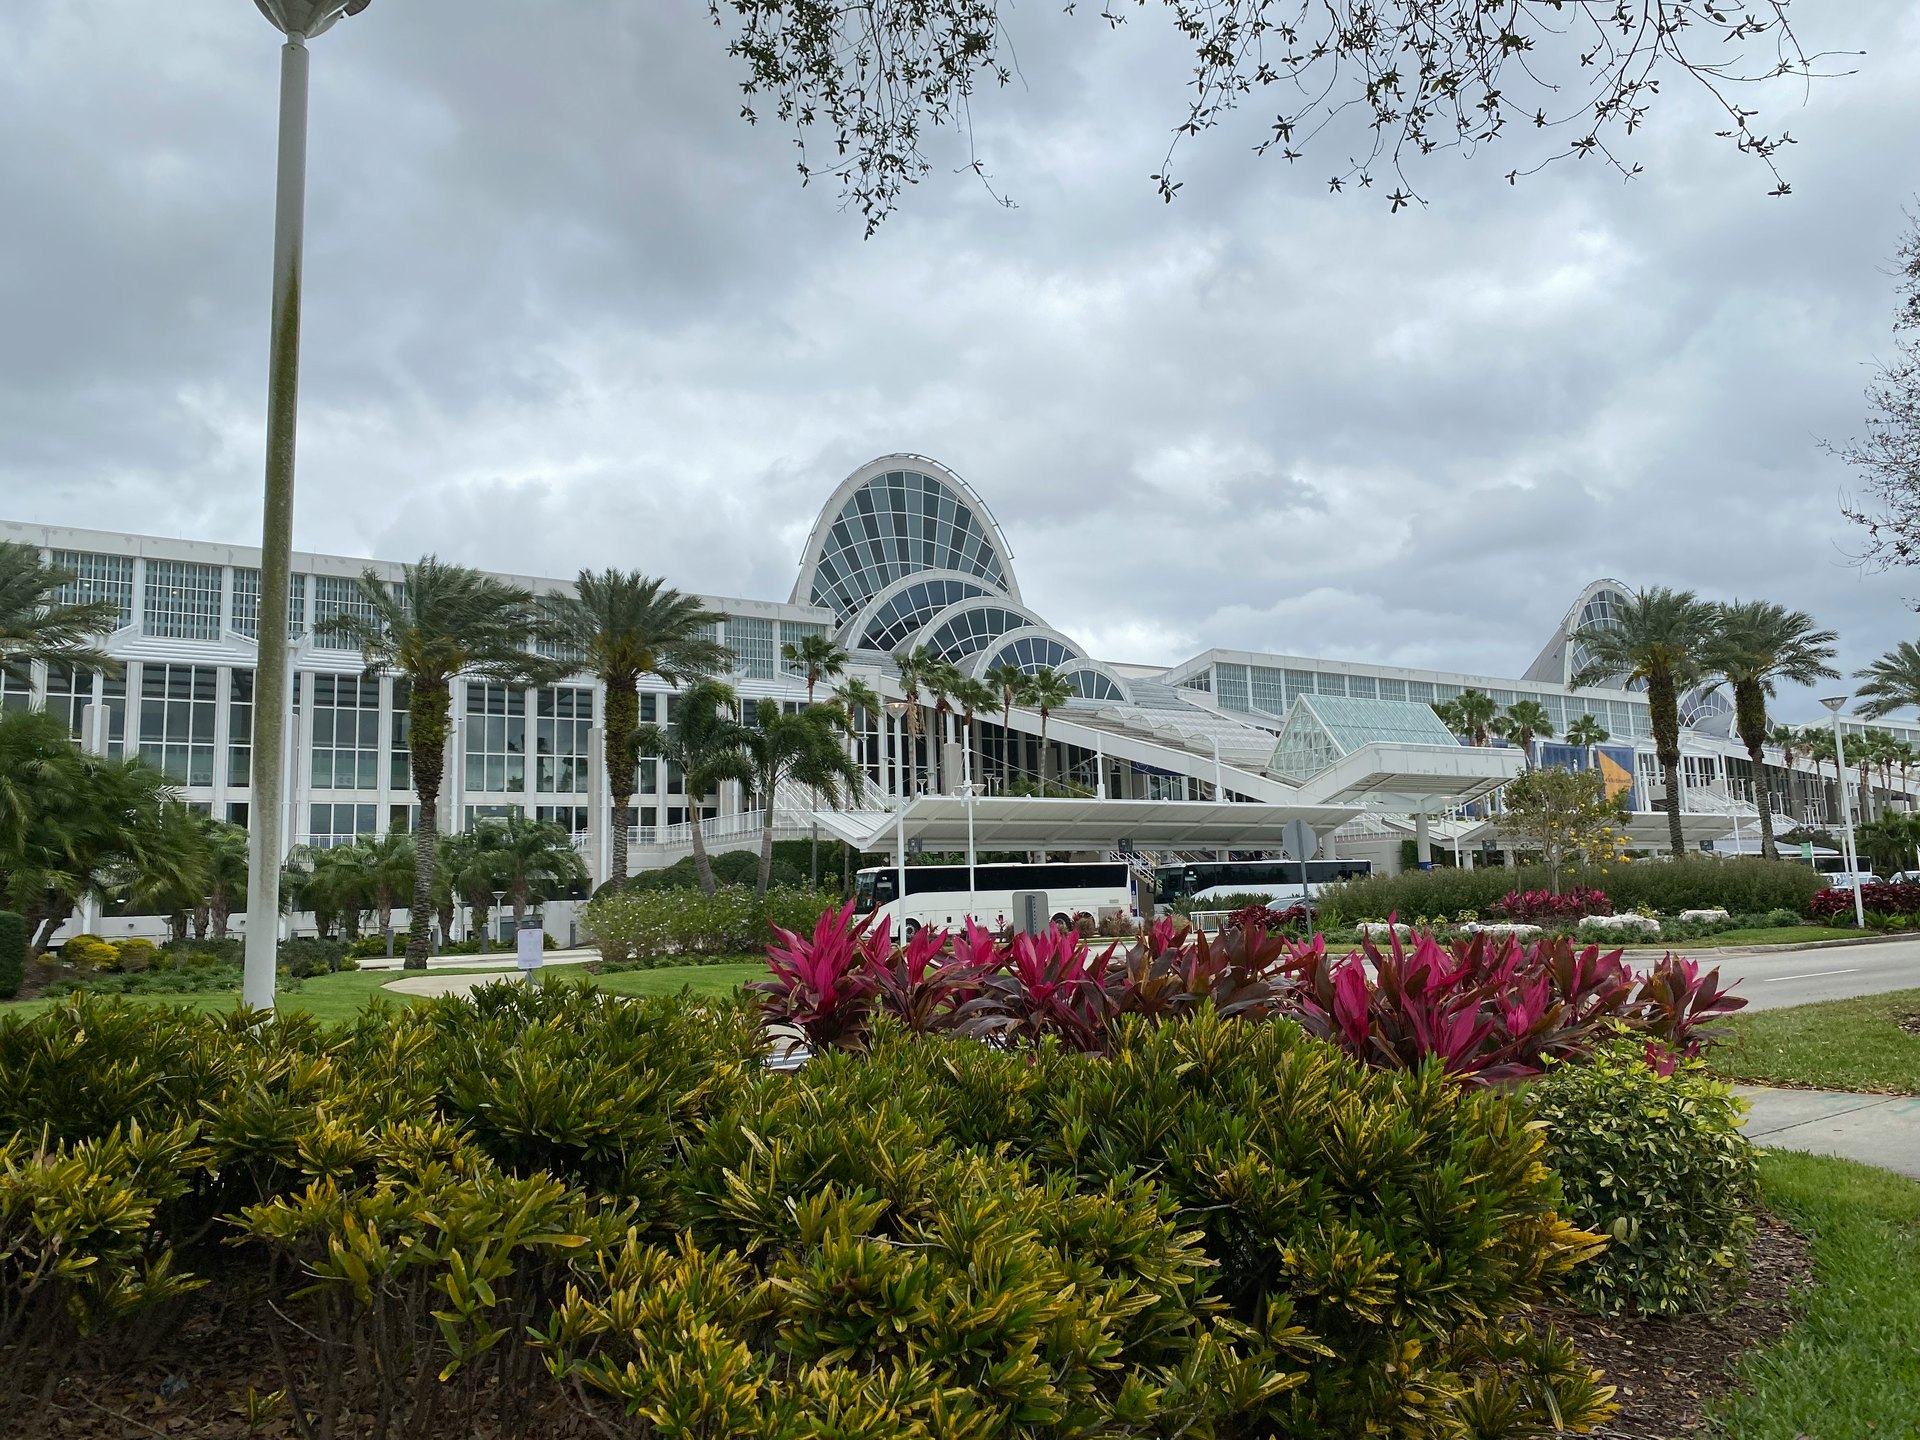 The Future of Equipment Rental event took place at the Orange County Convention Center in Orlando, Fla.